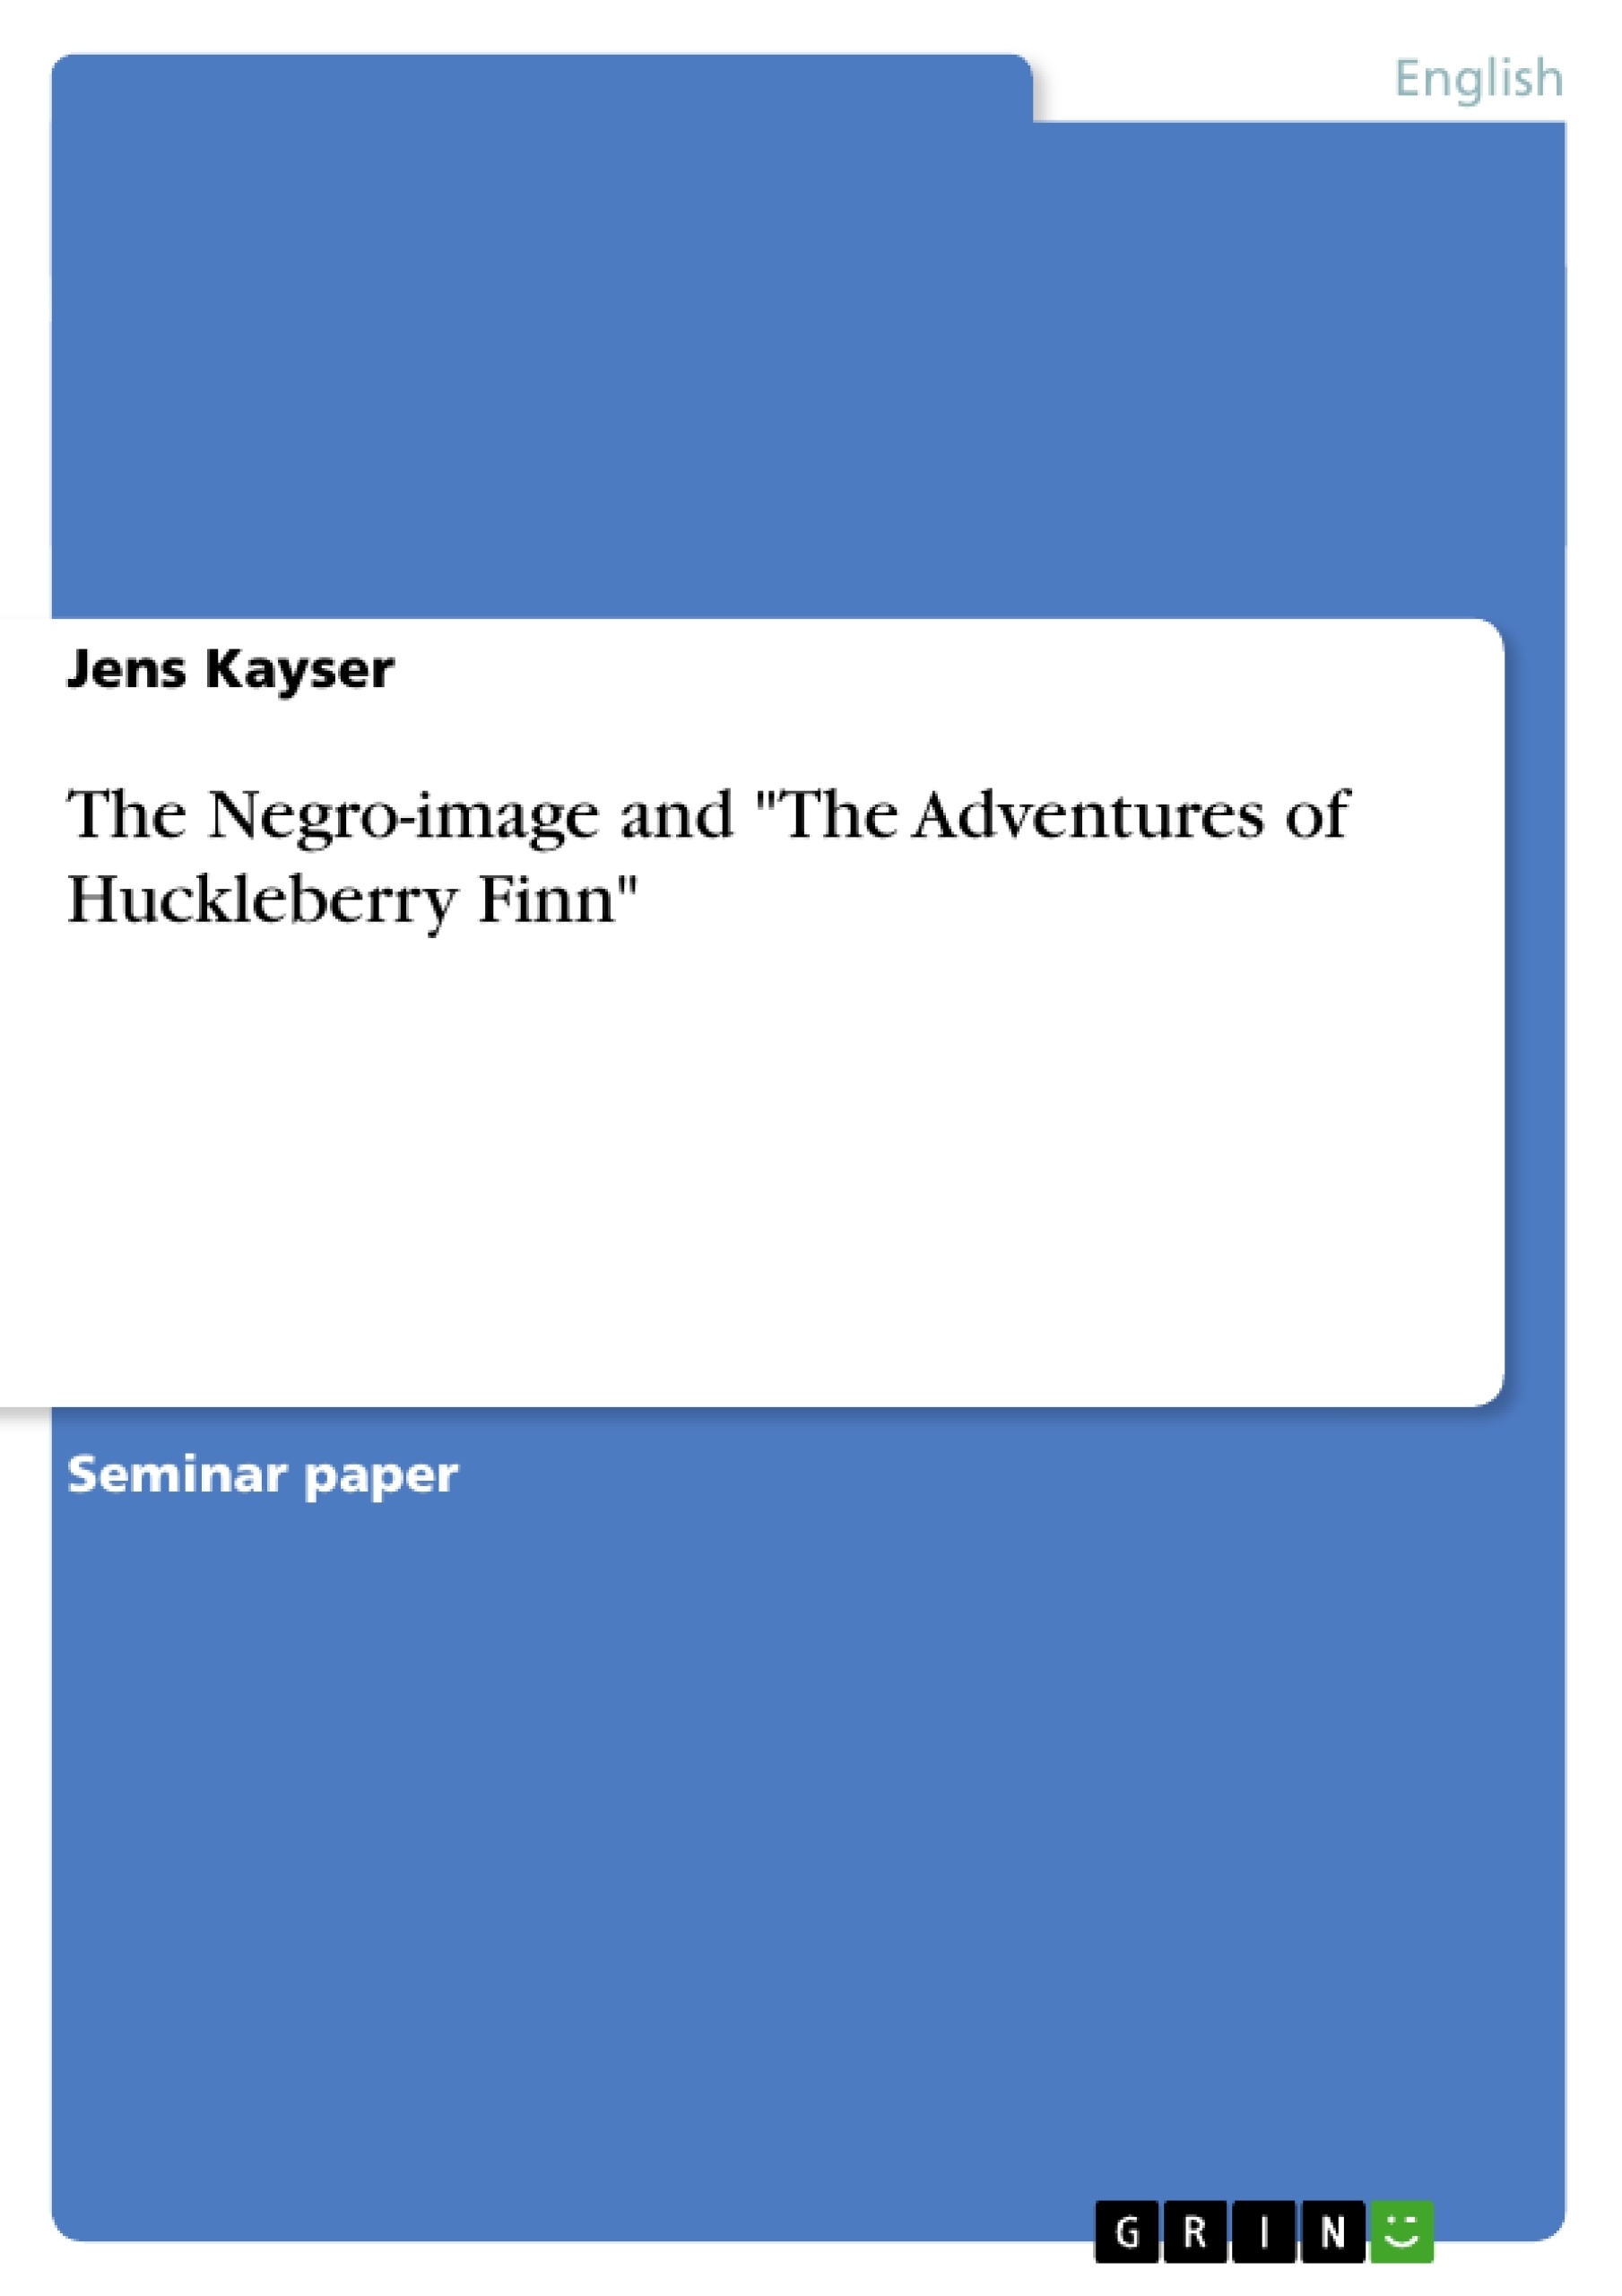 Título: The Negro-image and "The Adventures of Huckleberry Finn"